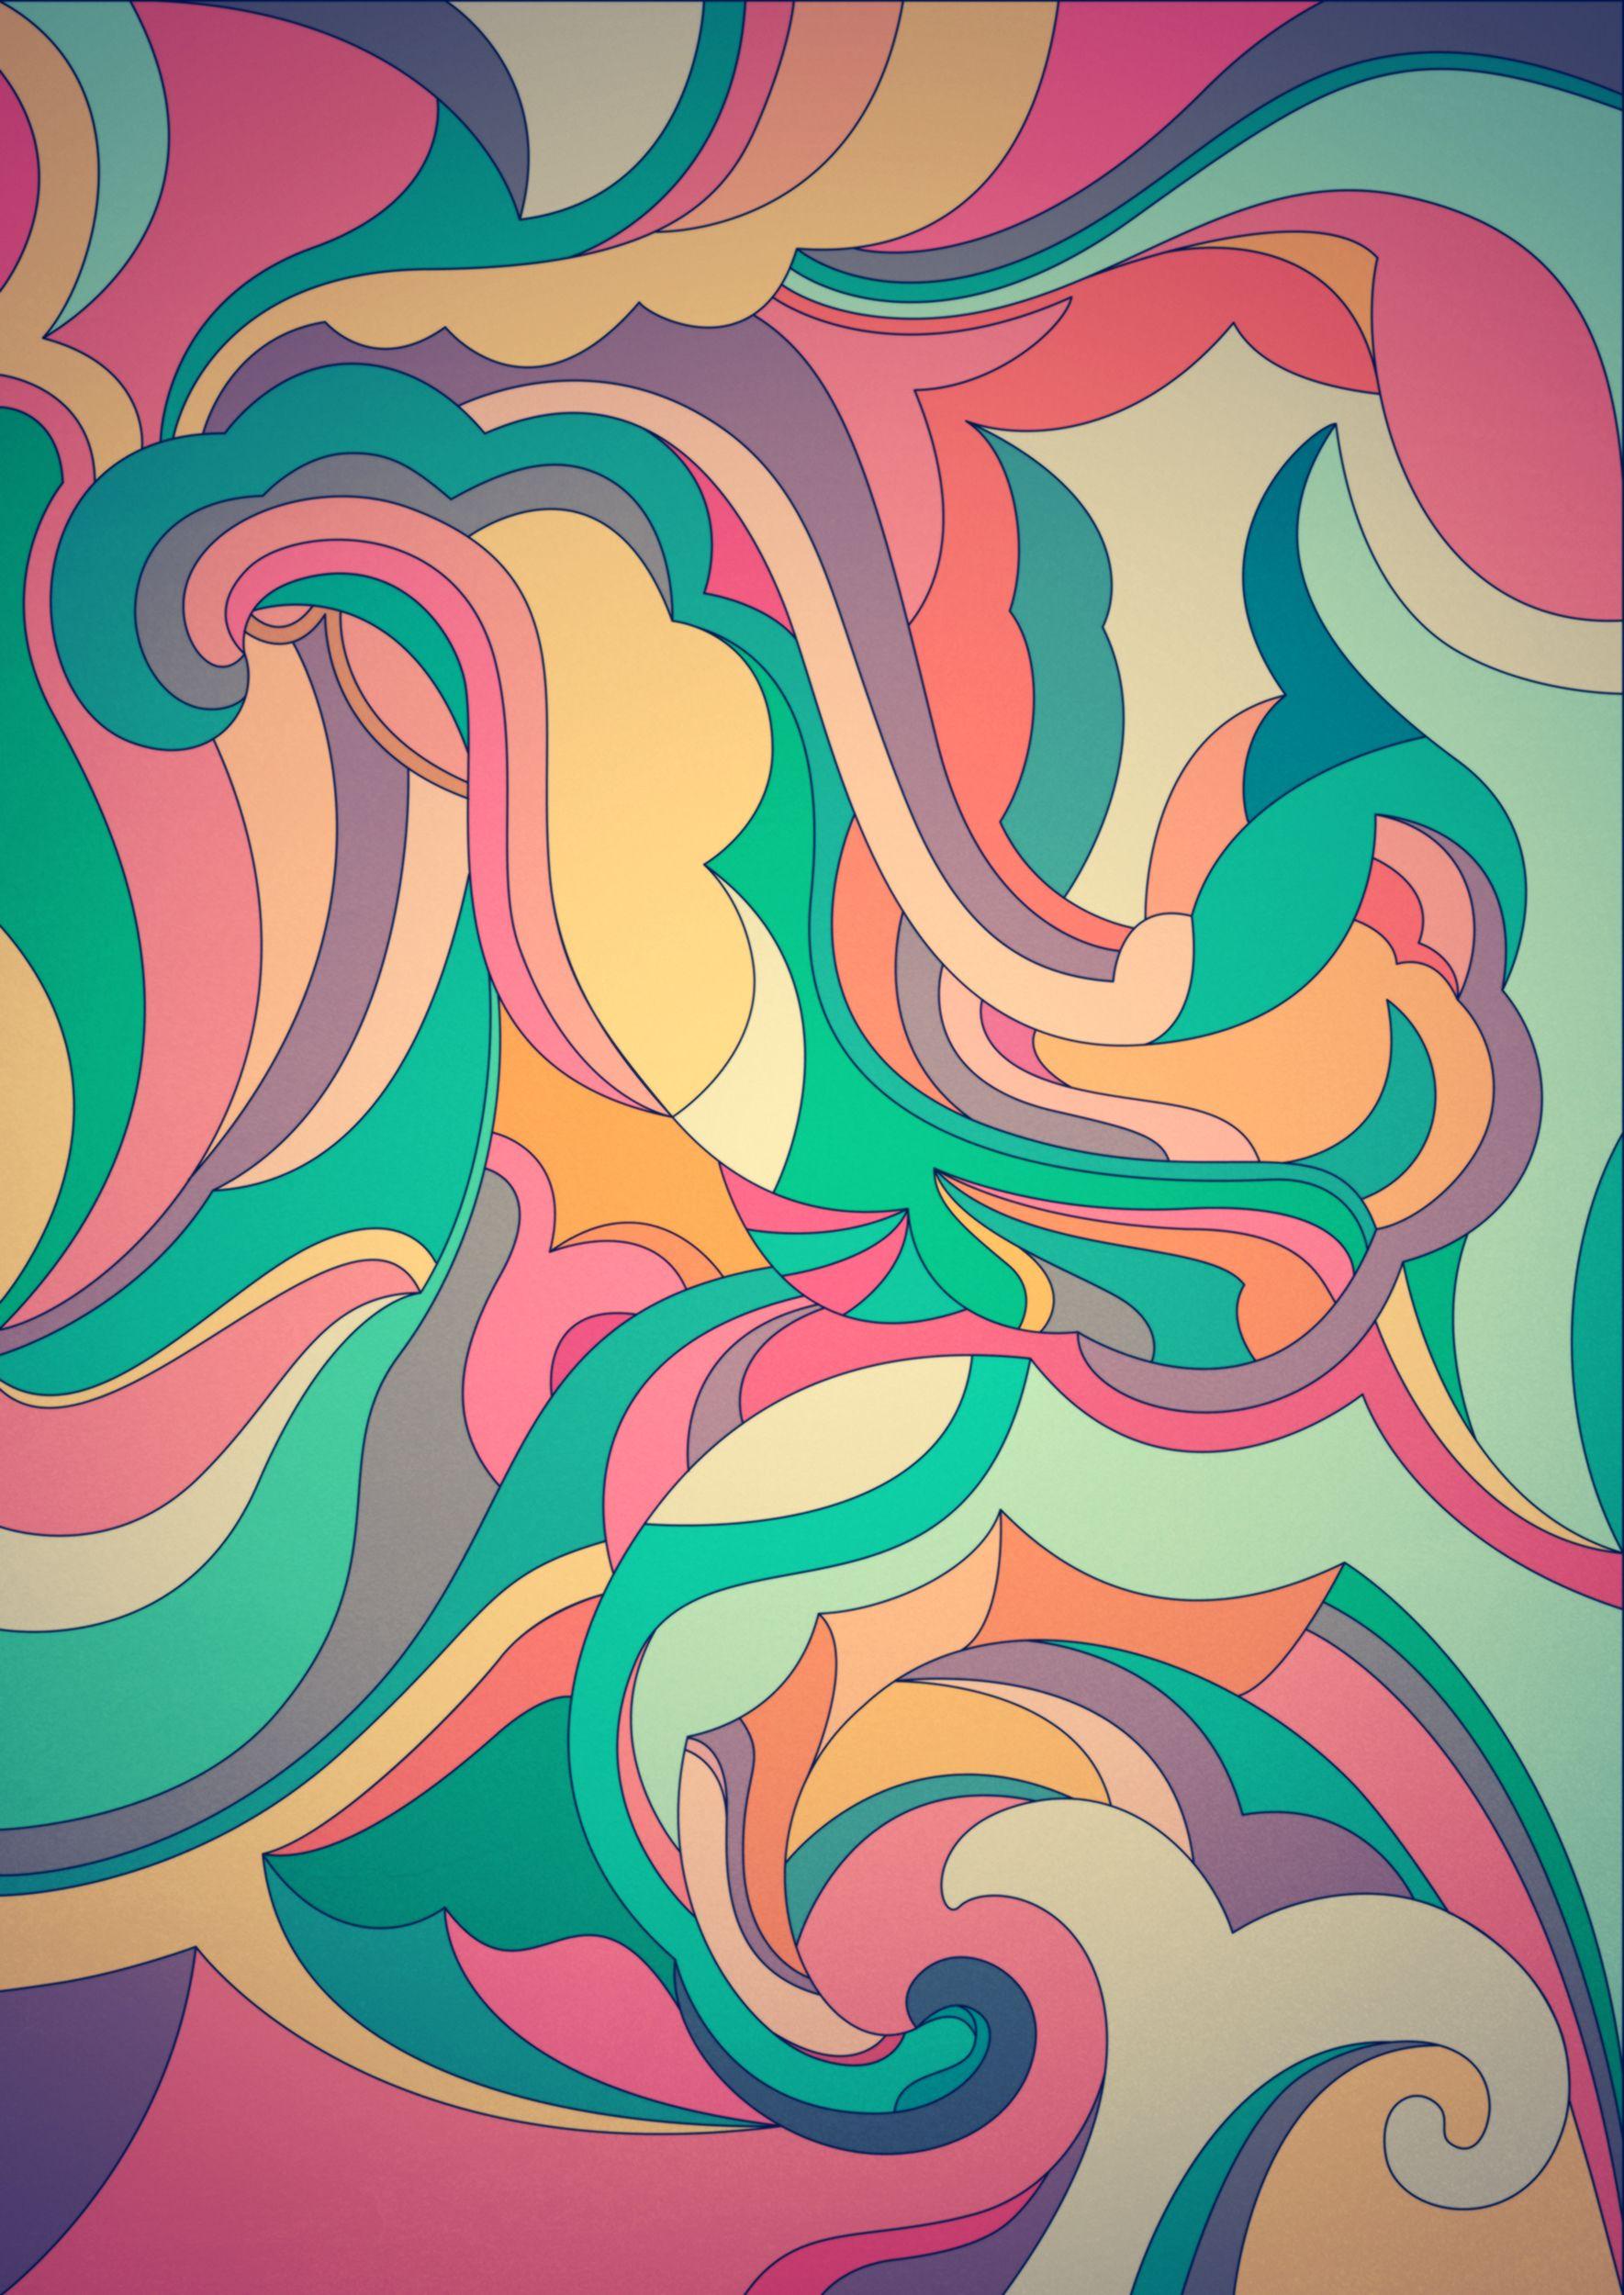 Retro Groovy Background Images HD Pictures and Wallpaper For Free Download   Pngtree